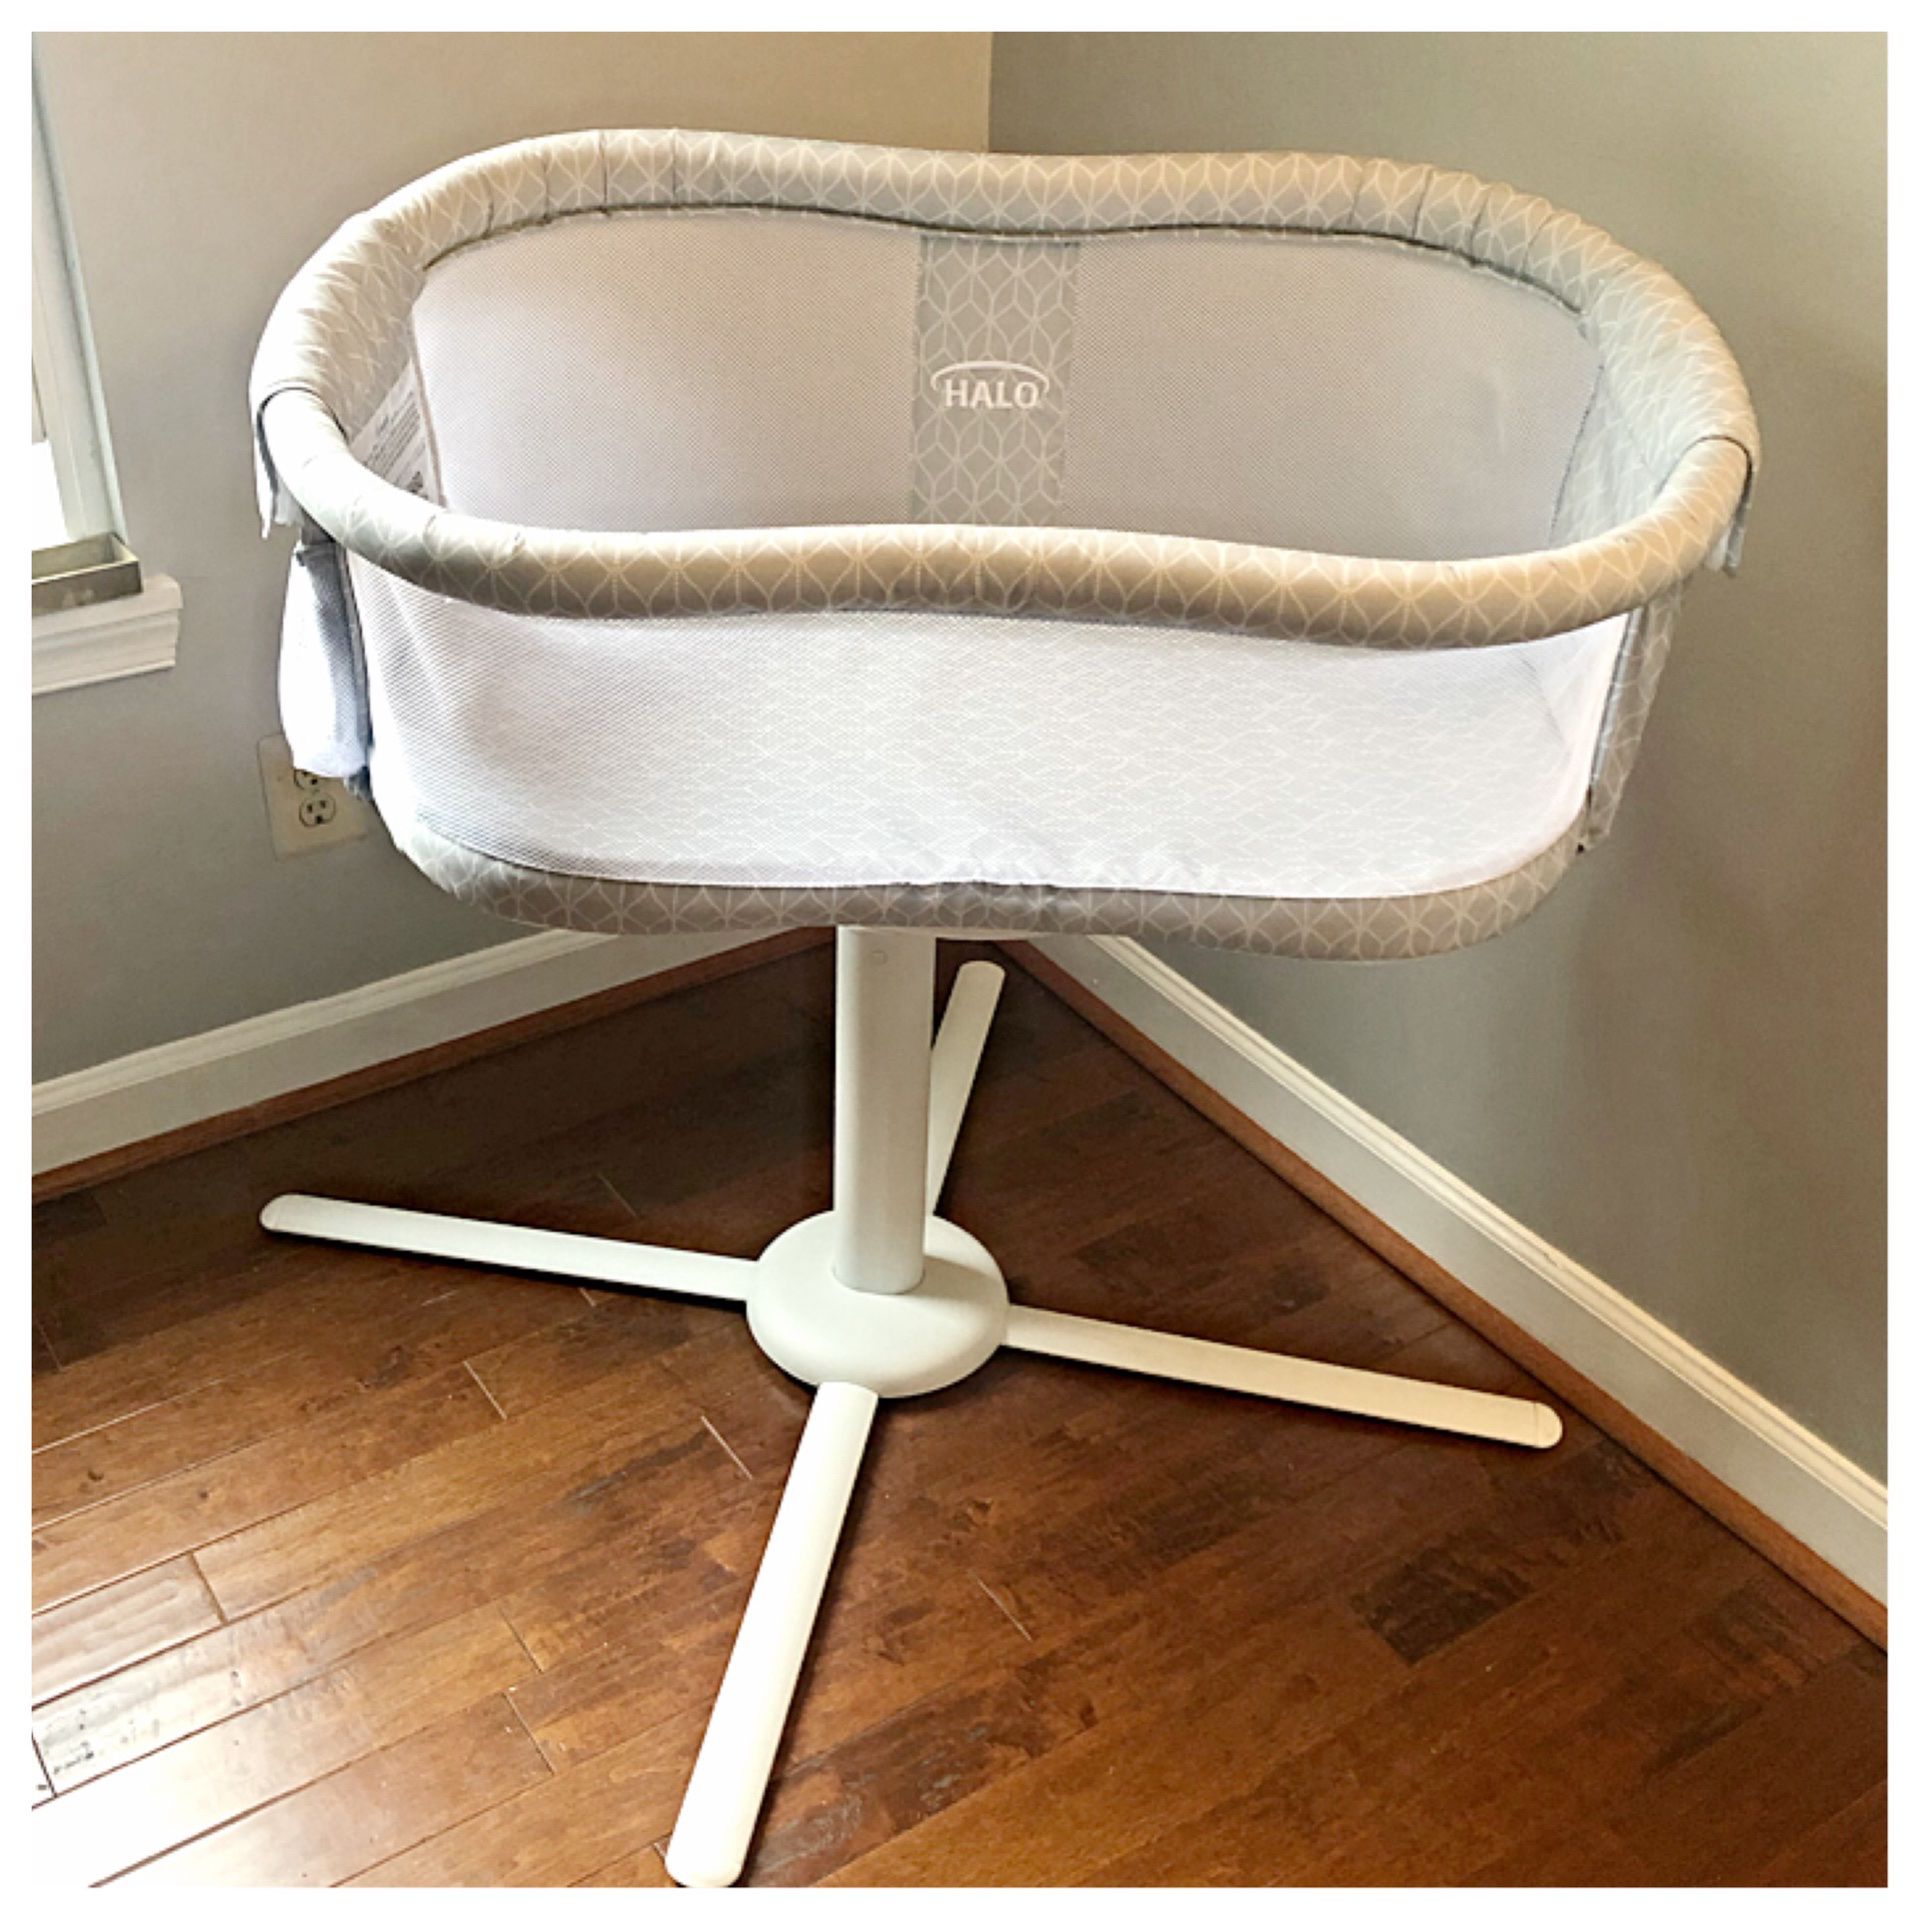 Never Used- Baby Halo Bassinet